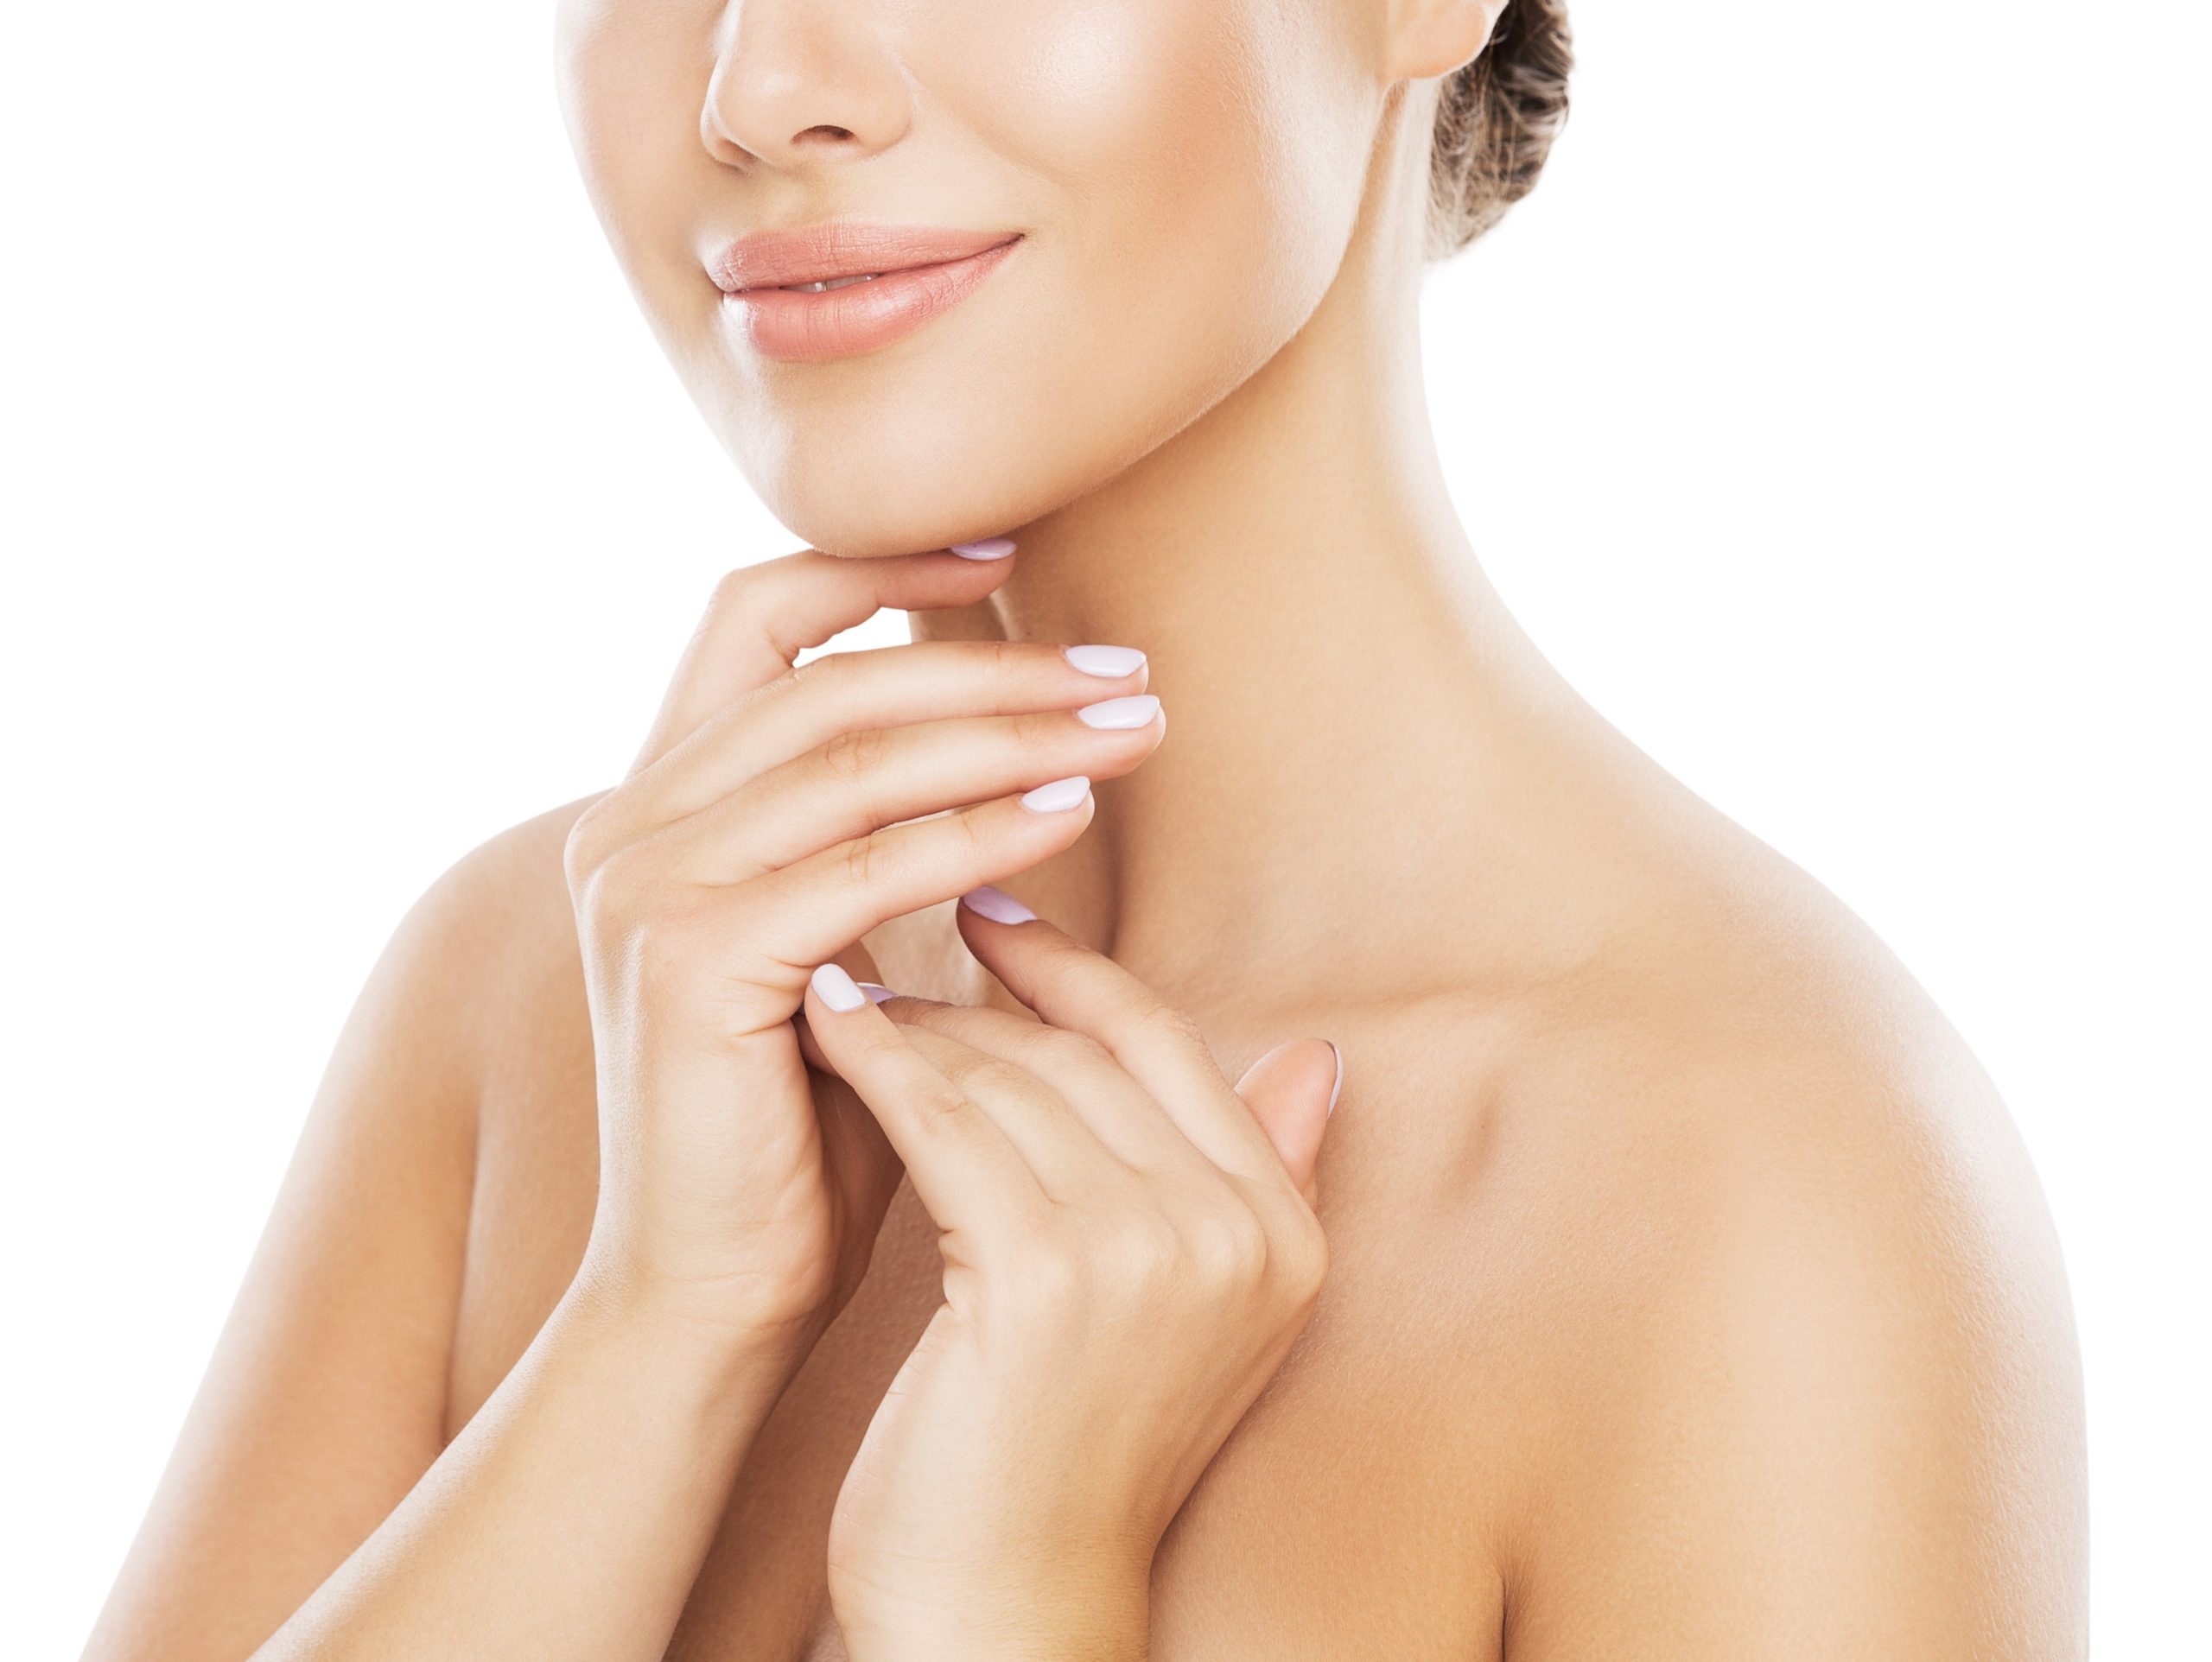 Glowing skin of a smiling woman | Get Kybella at Arabella Medical Aesthetics in Knoxville, TN